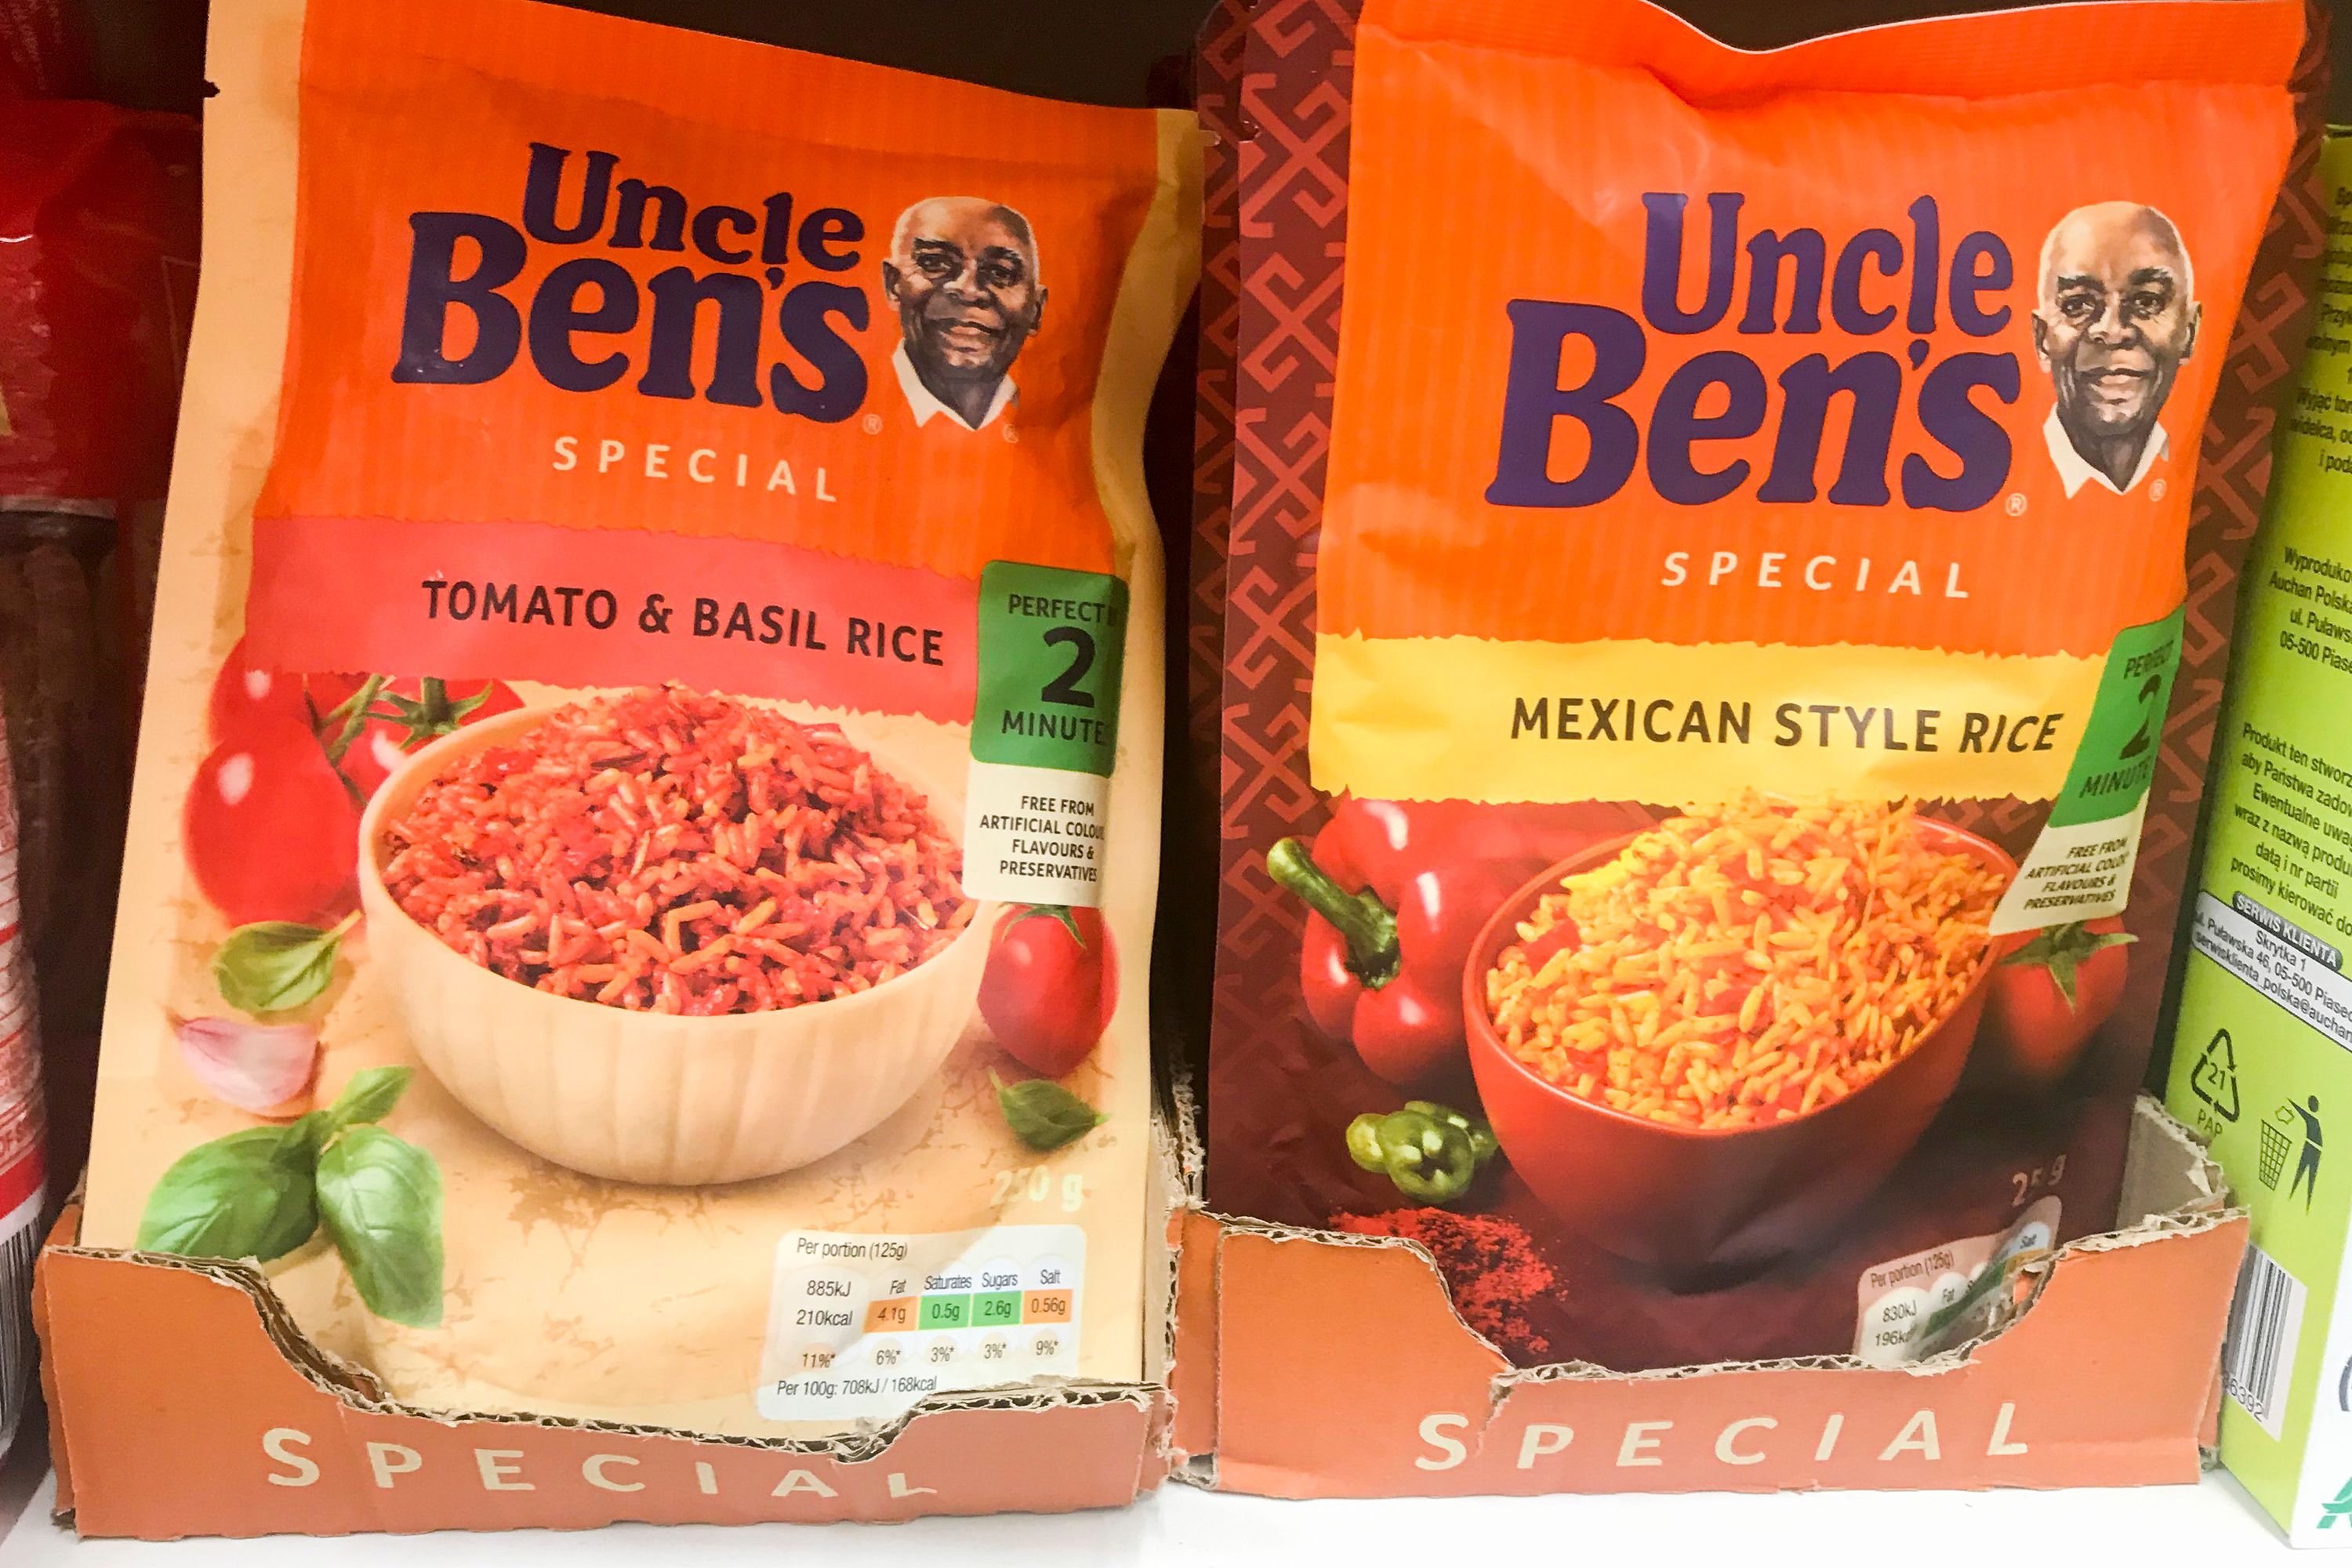 Uncle Ben's rice to get revamp after criticism over racial stereotyping, Food & drink industry